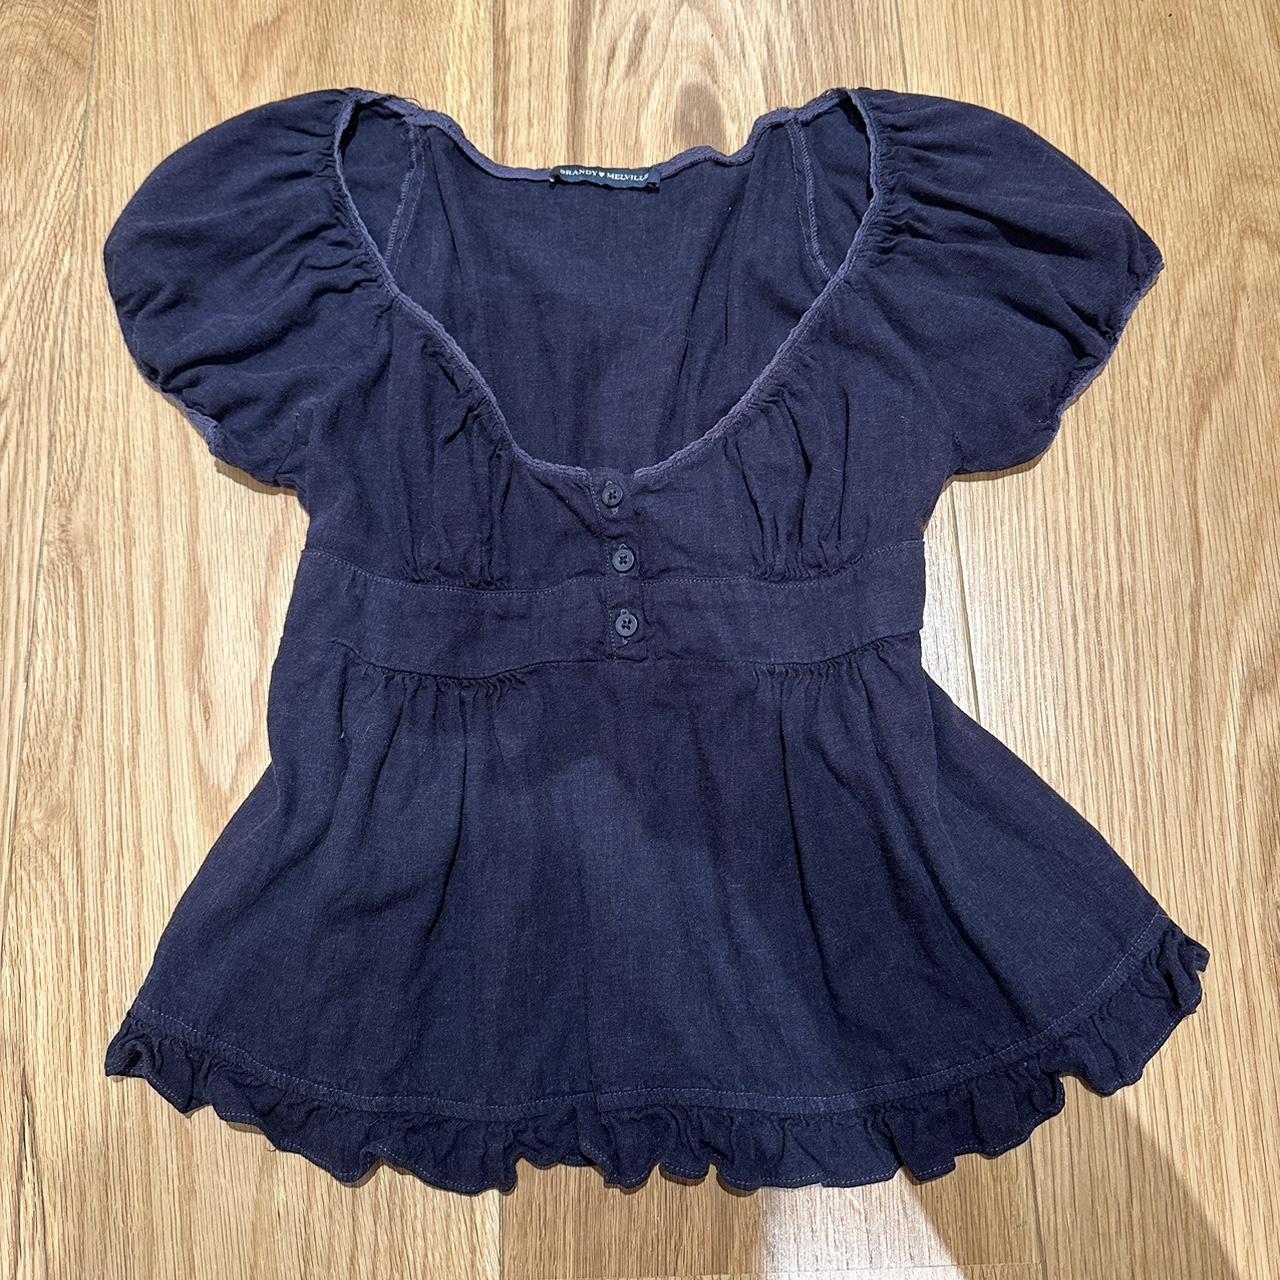 Brandy Melville Mabel Top Blue - $17 (32% Off Retail) - From Sophia